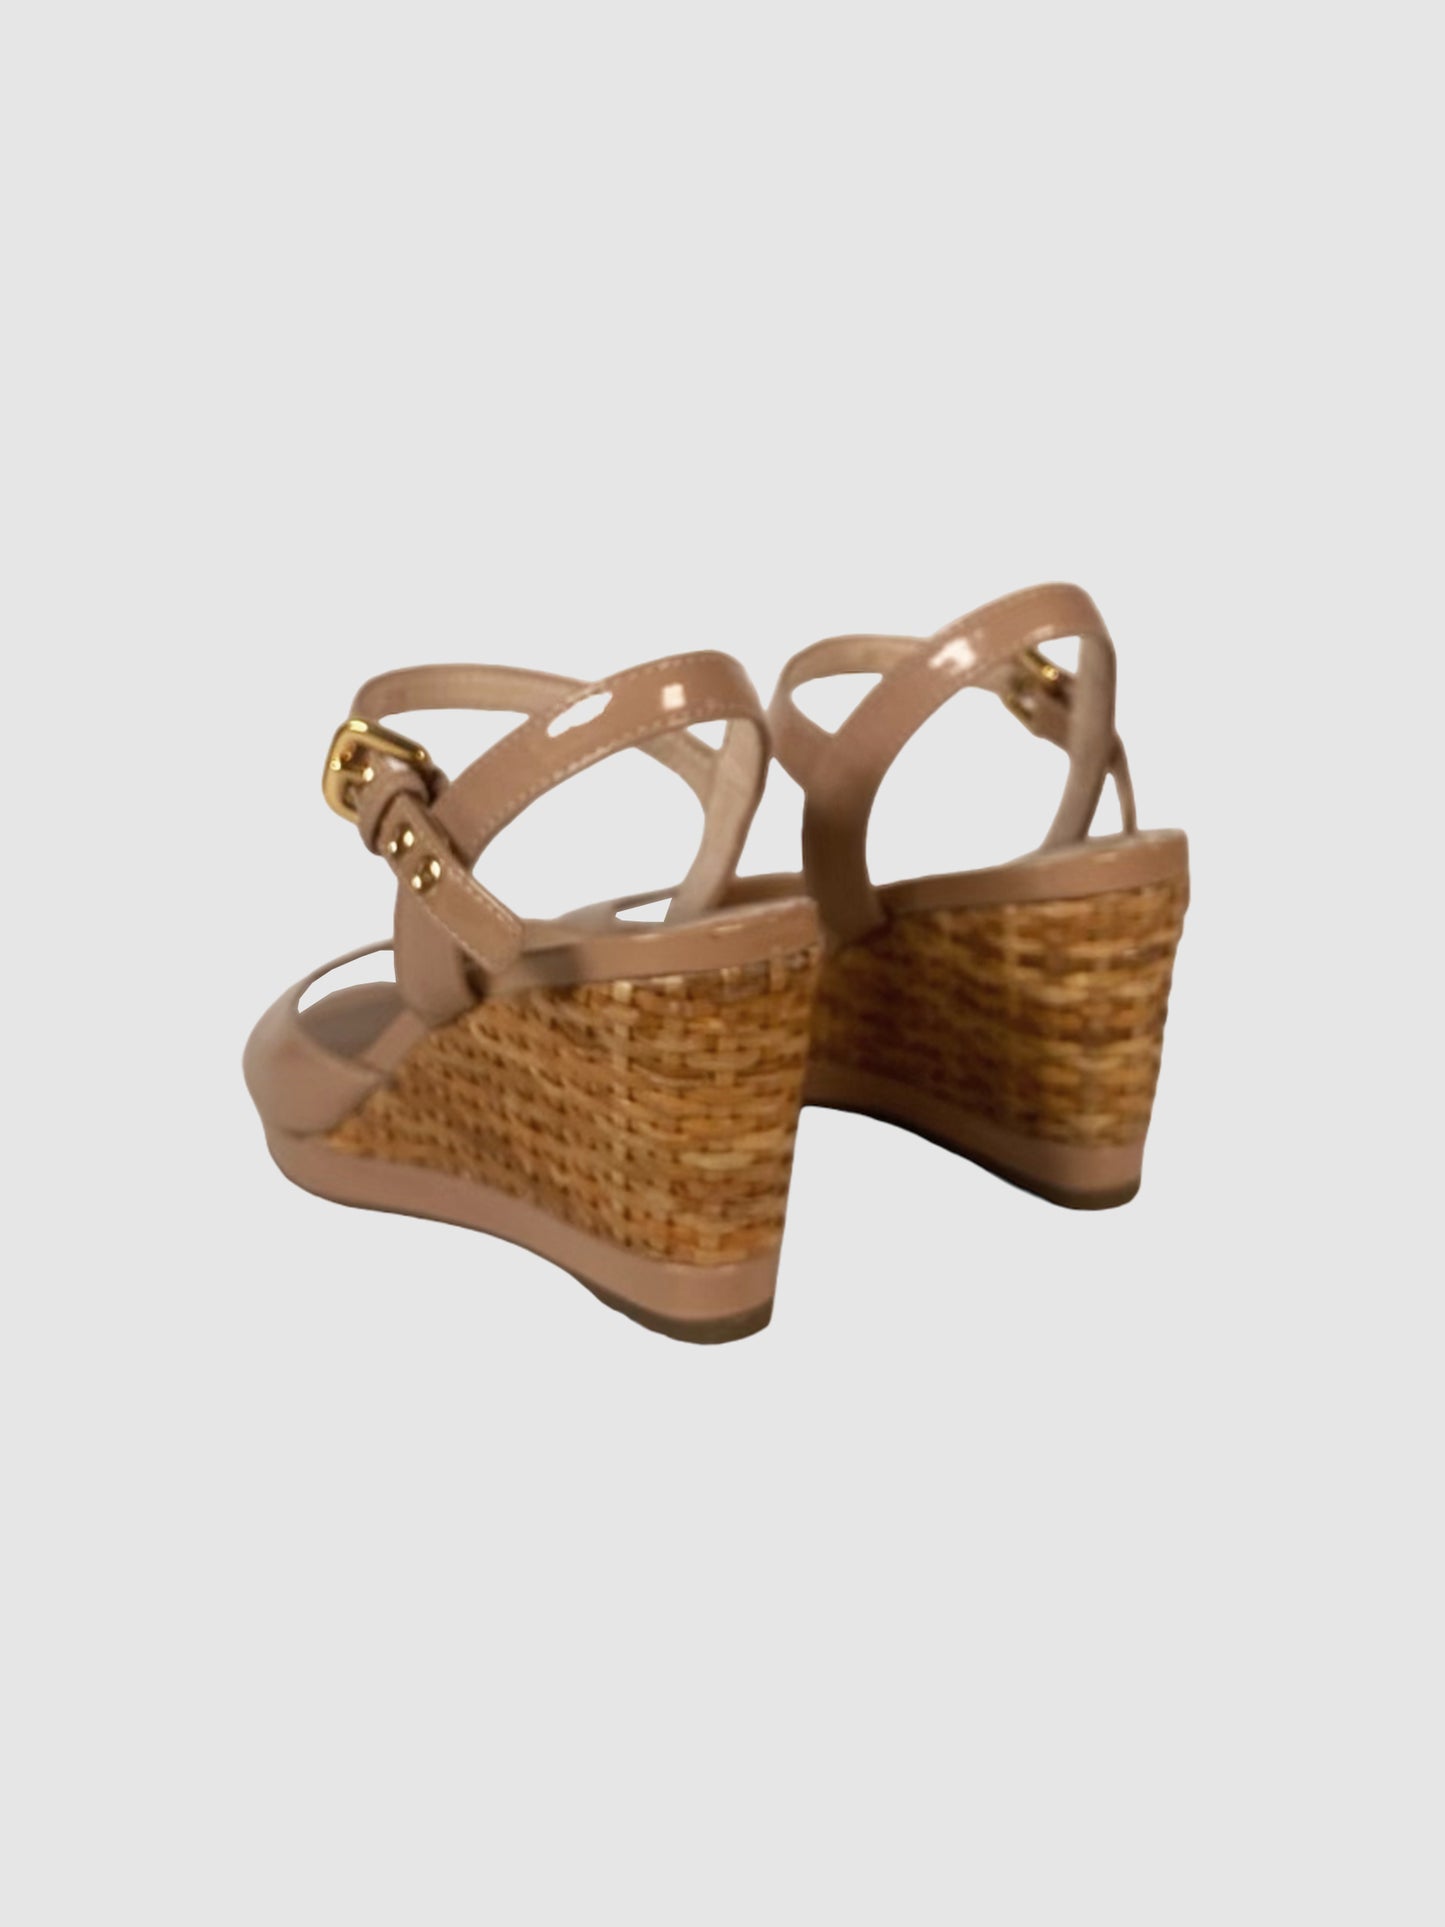 Prada Patent Leather Woven Wedges - Size 6